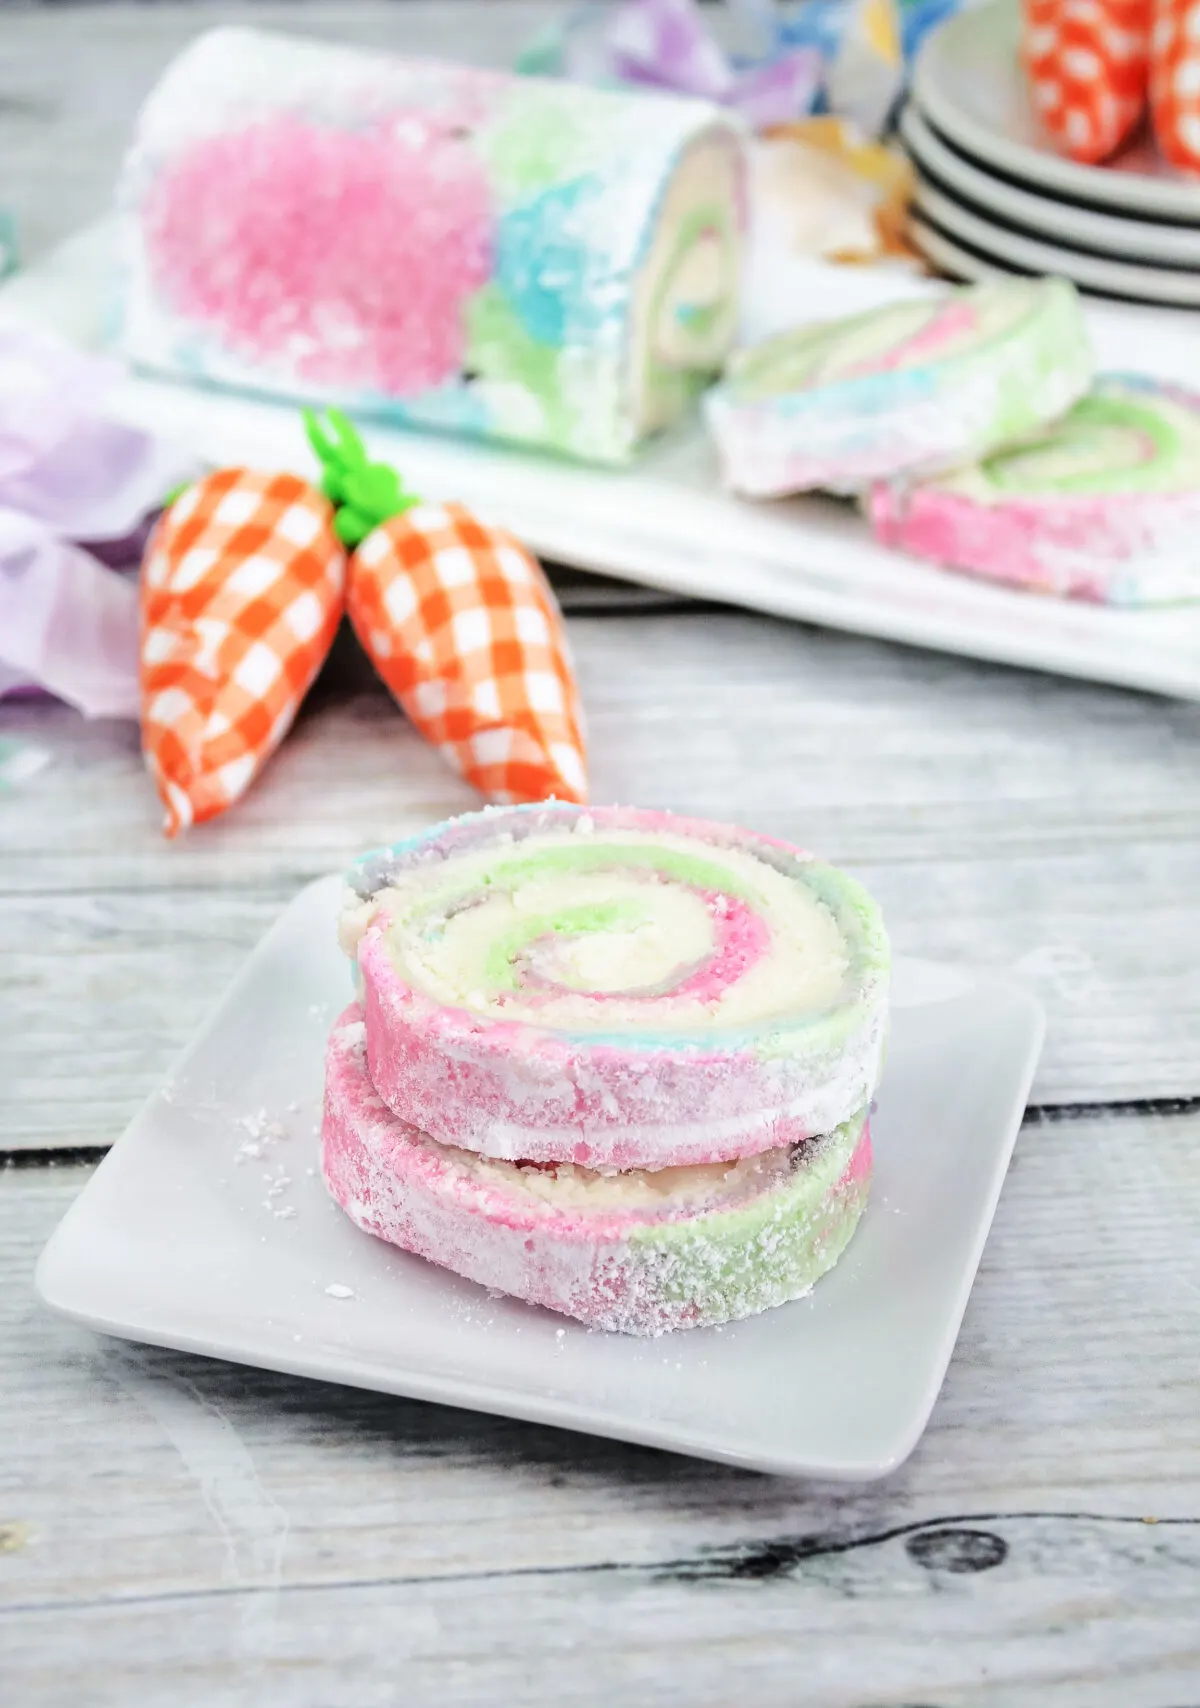 Celebrate Easter with this delicious pastel tie-dyed sponge cake. Learn how to make an impressive, yet easy Easter Swiss Roll recipe here!